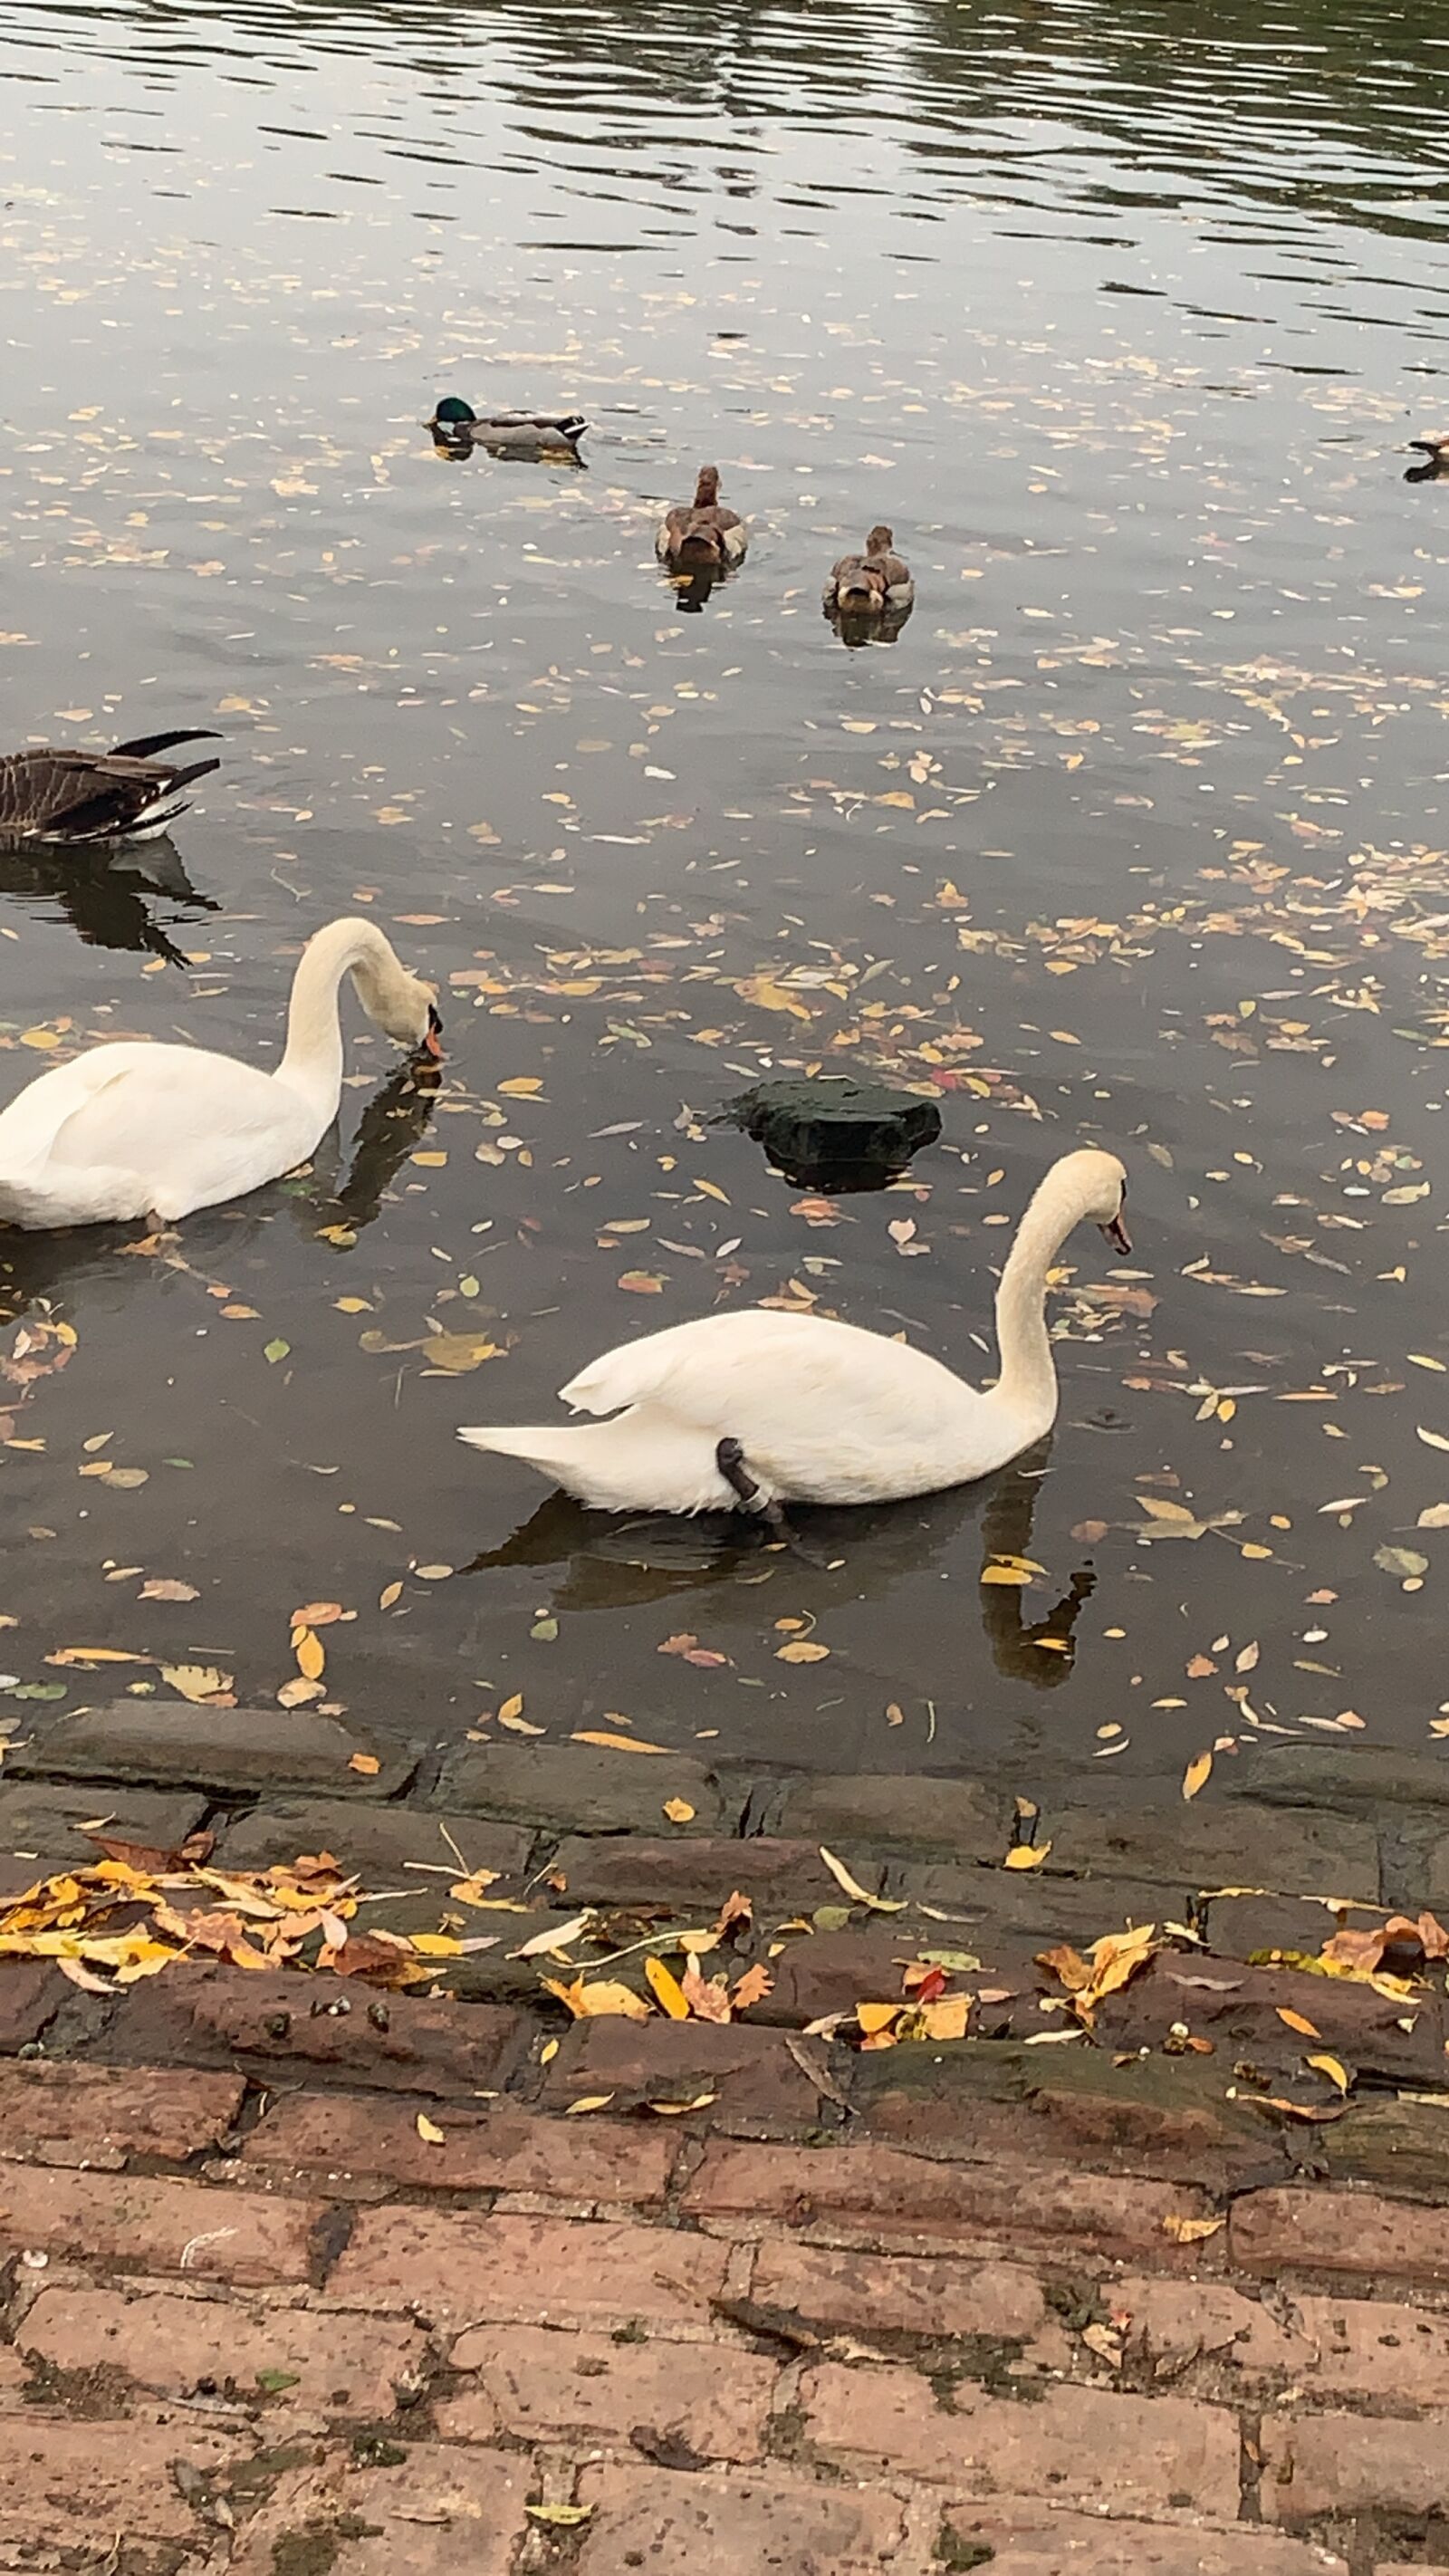 iPhone XS Max back camera 4.25mm f/1.8 sample photo. Swan, river, germany photography